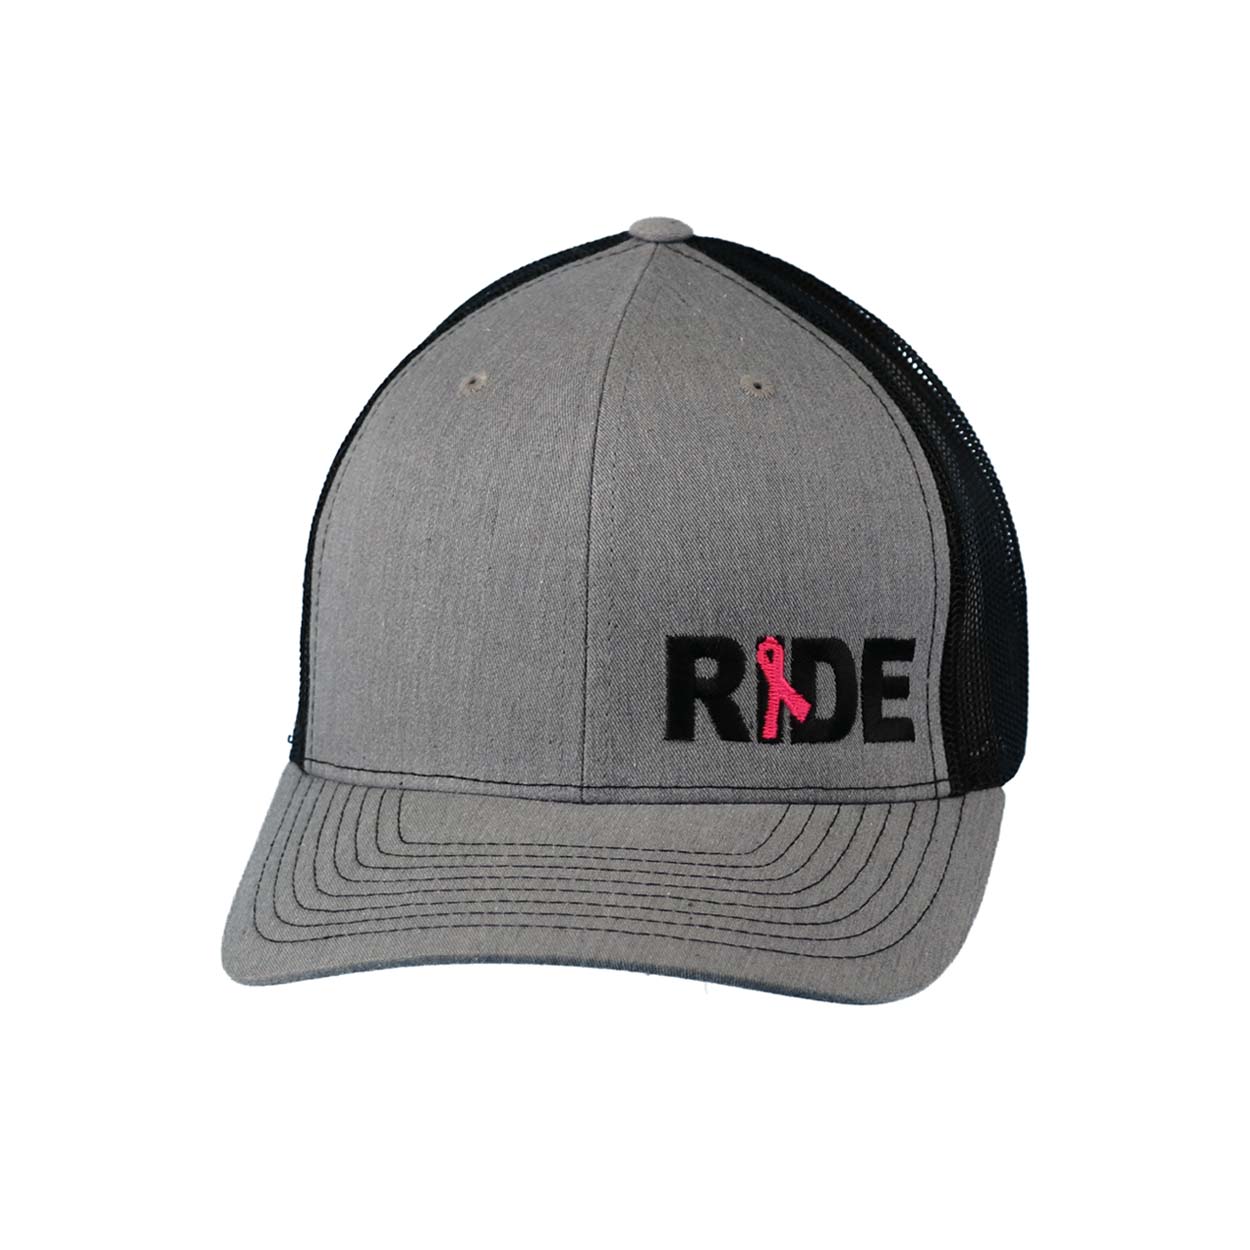 Ride Ribbon Logo Night Out Embroidered Snapback Trucker Hat Heather Gray/Black